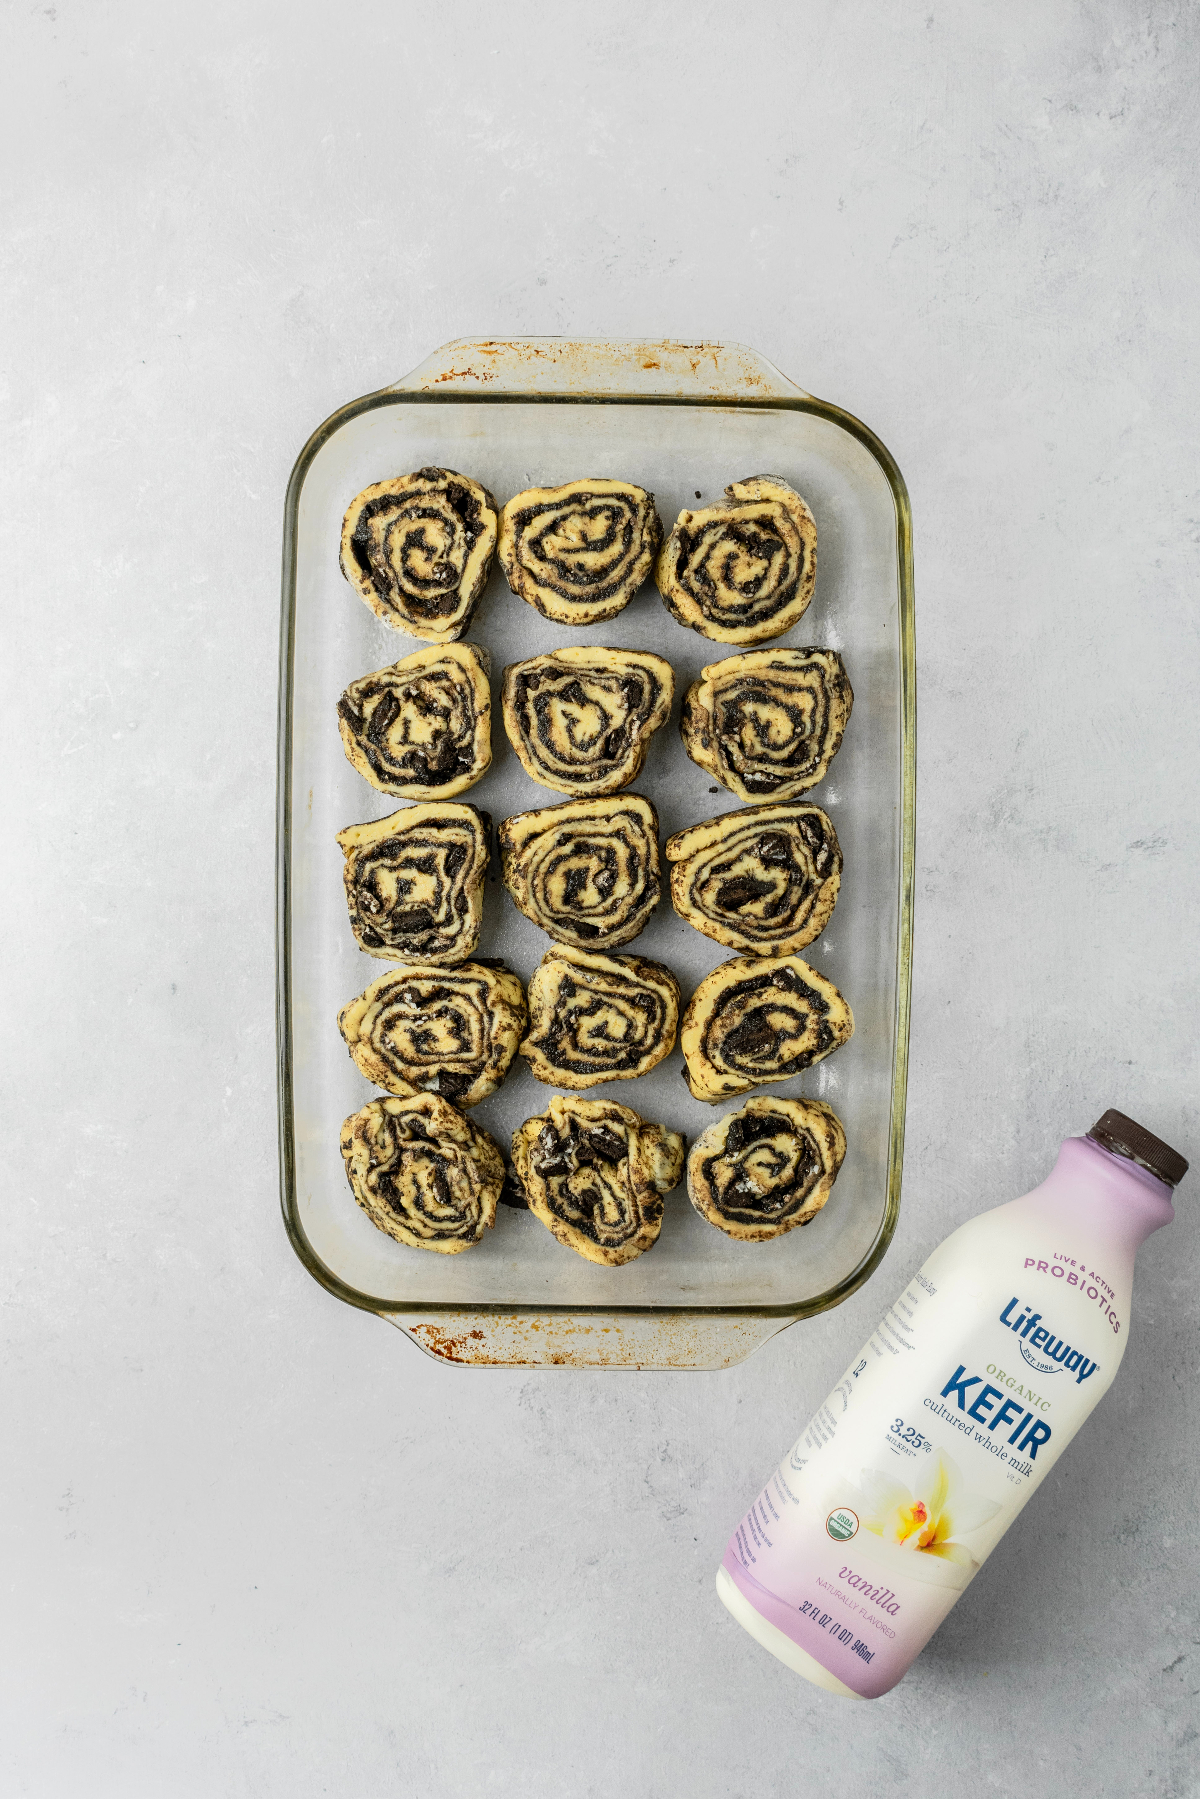 Cinnamon roll slices in a glass baking pan with a bottle of Kefir.